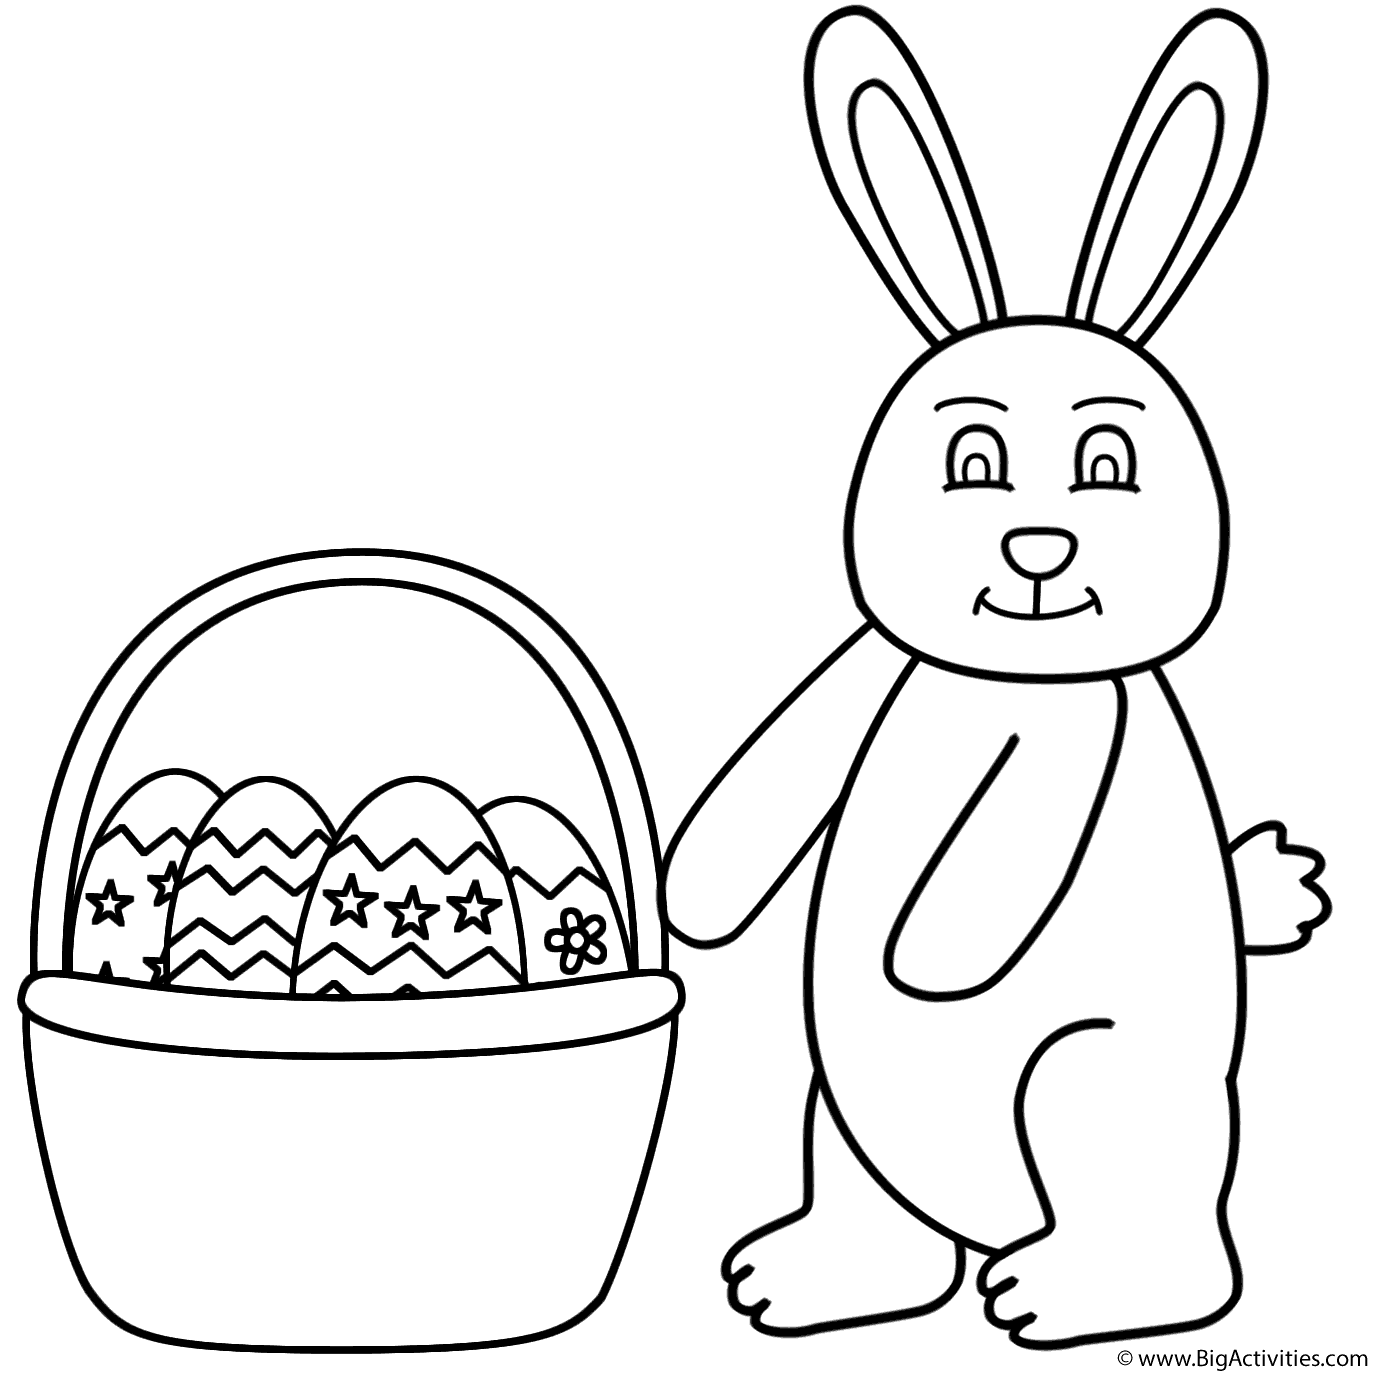 Easter Bunny and Basket of Easter Eggs   Coloring Page Easter